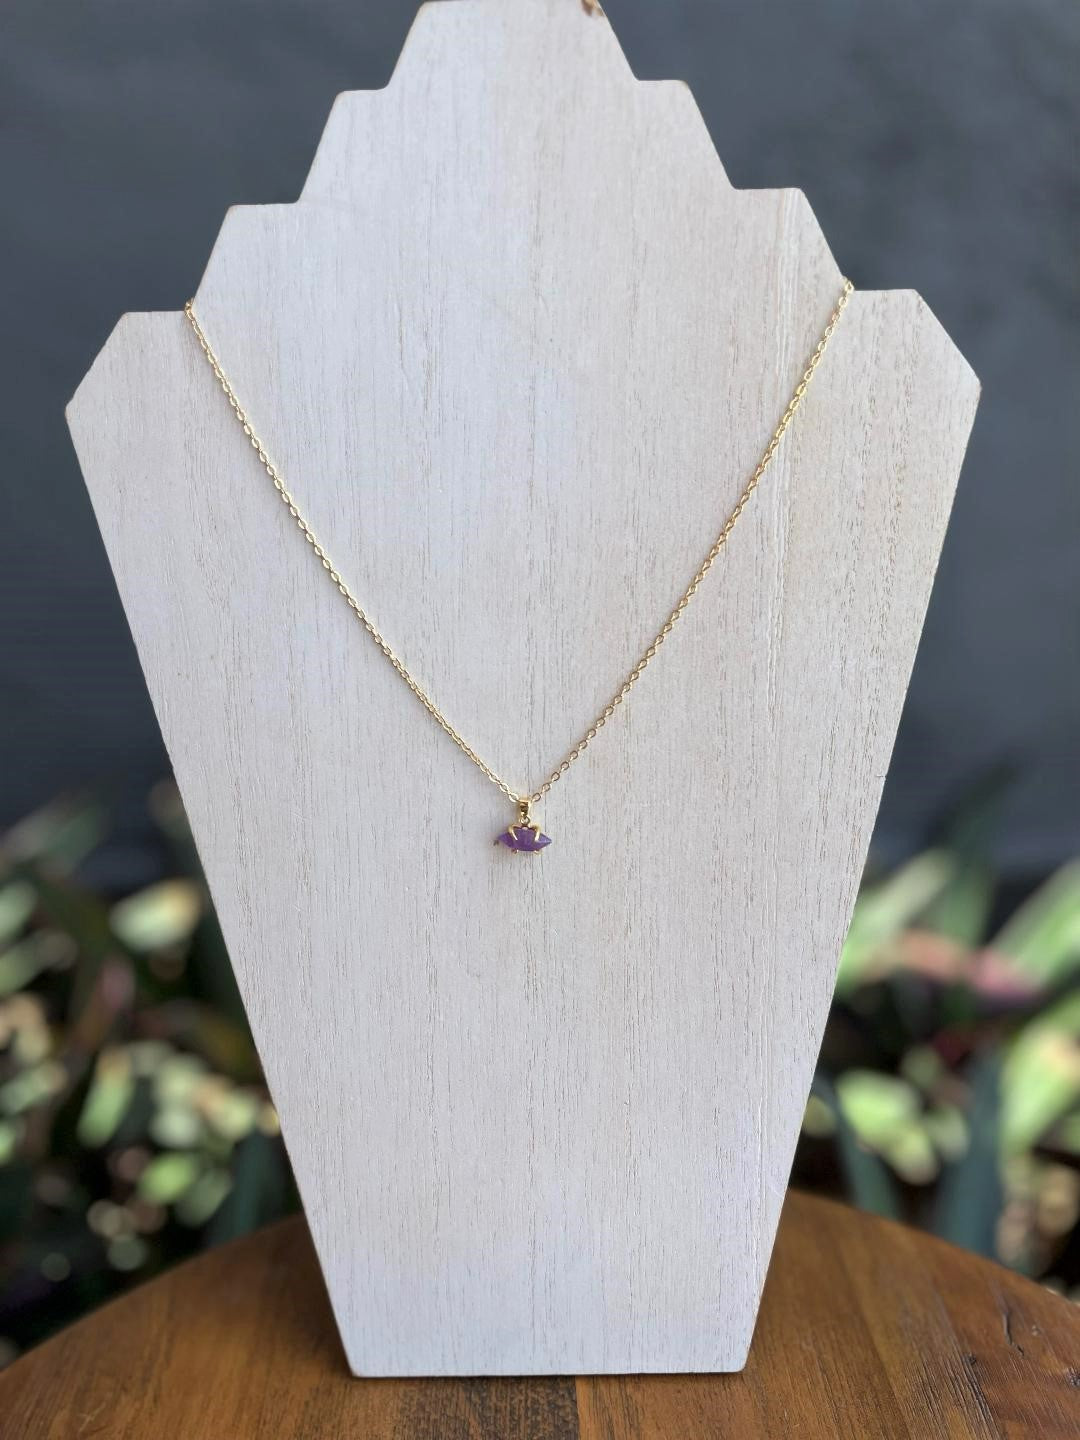 Gold Claw Necklace - Amethyst